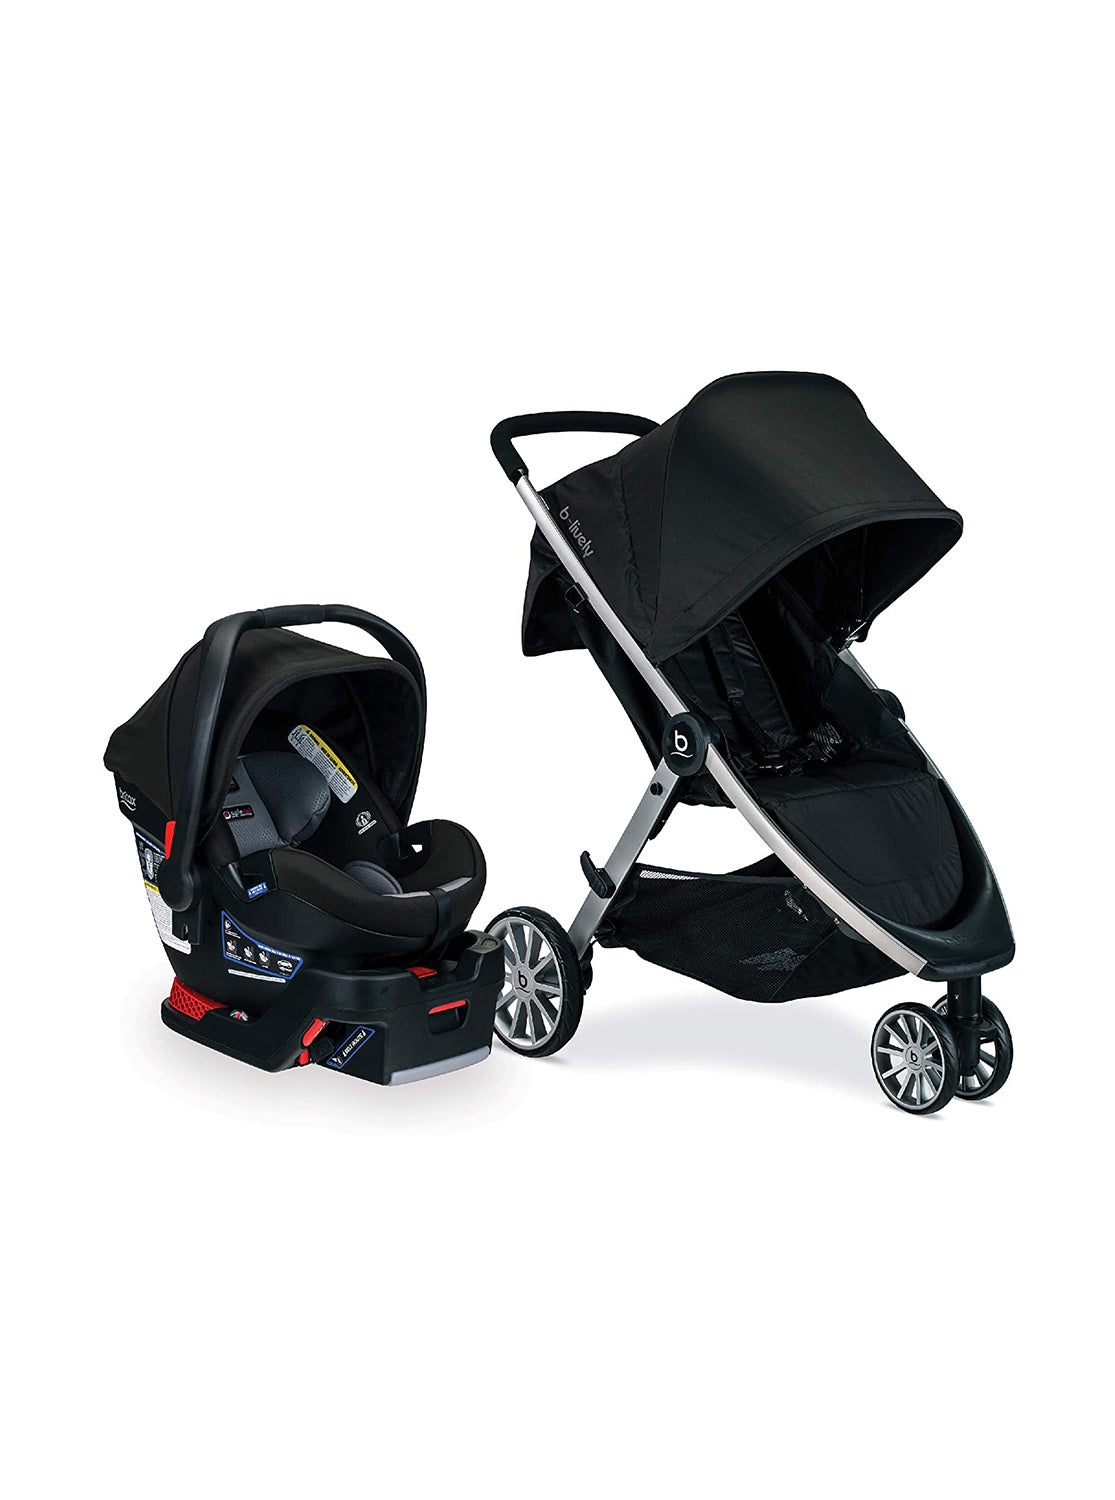 BRITAX B-Lively and B-Safe Ultra Travel System - ANB Baby -$300 - $500